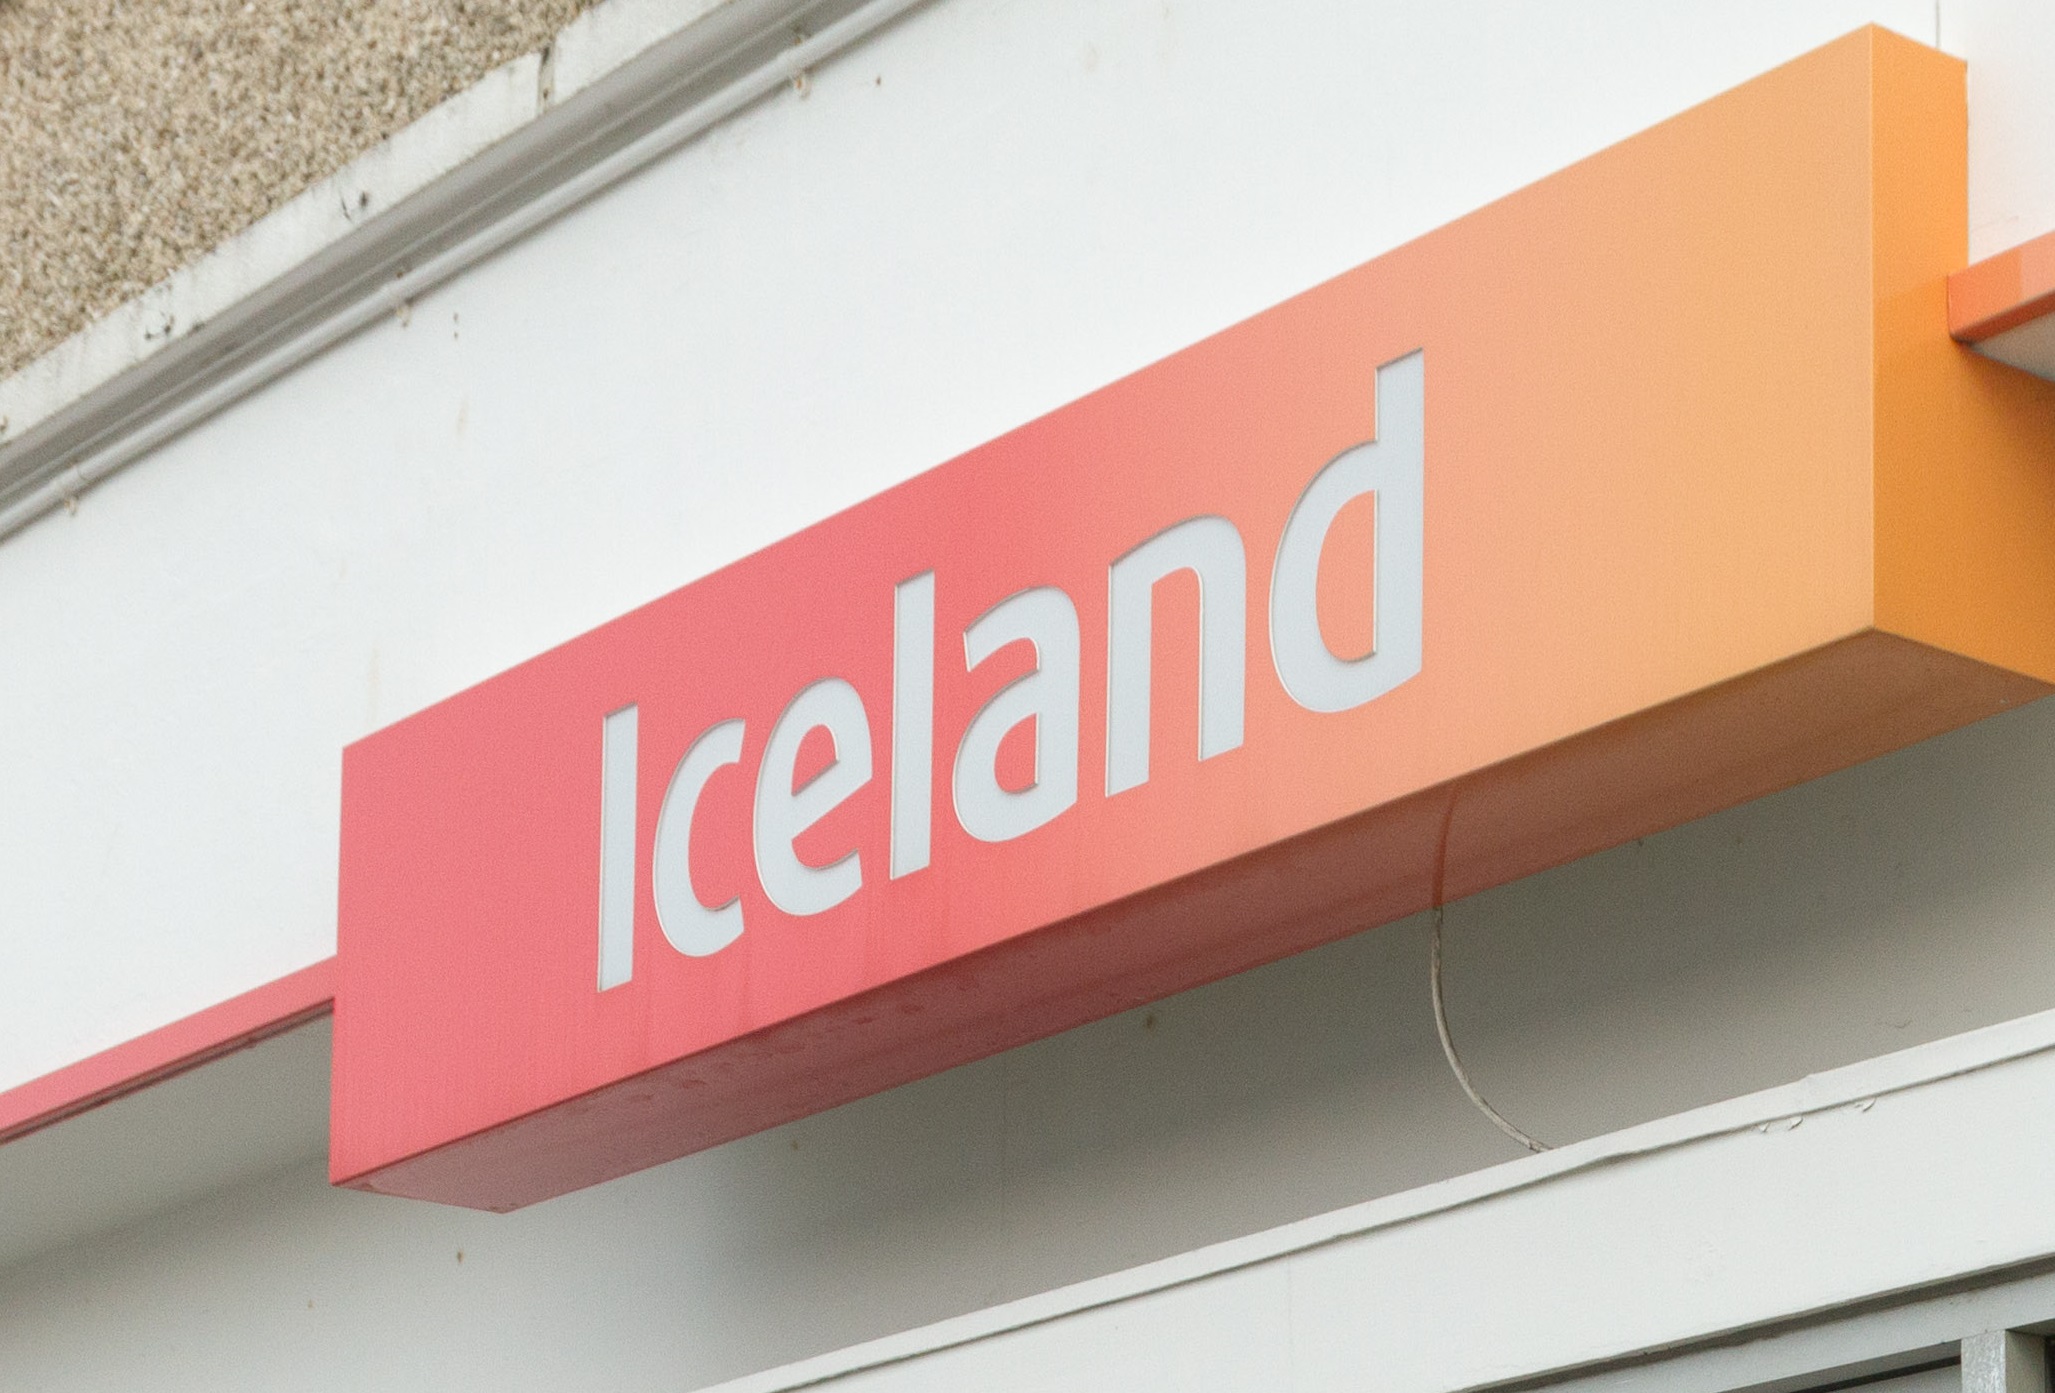 Iceland court battle with country could ‘last years’